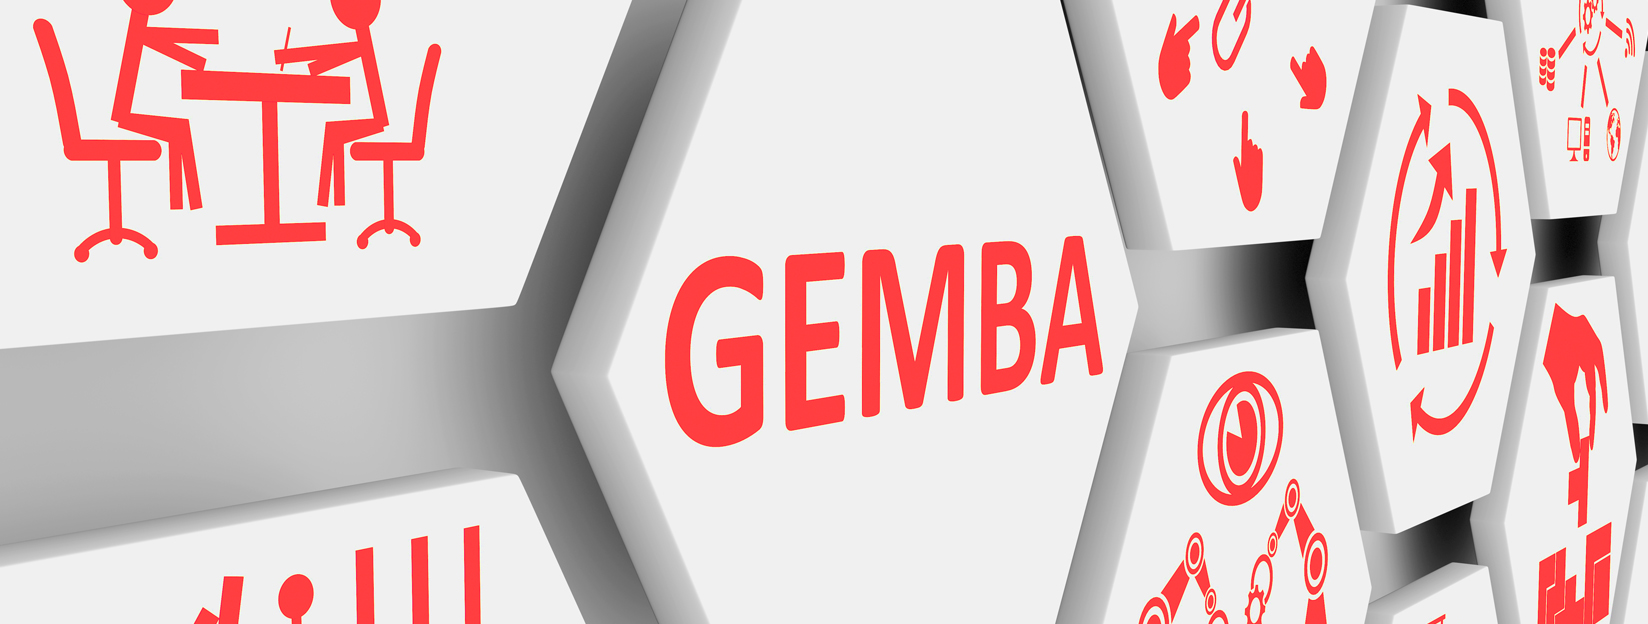 7 steps to a meaningful Gemba walk